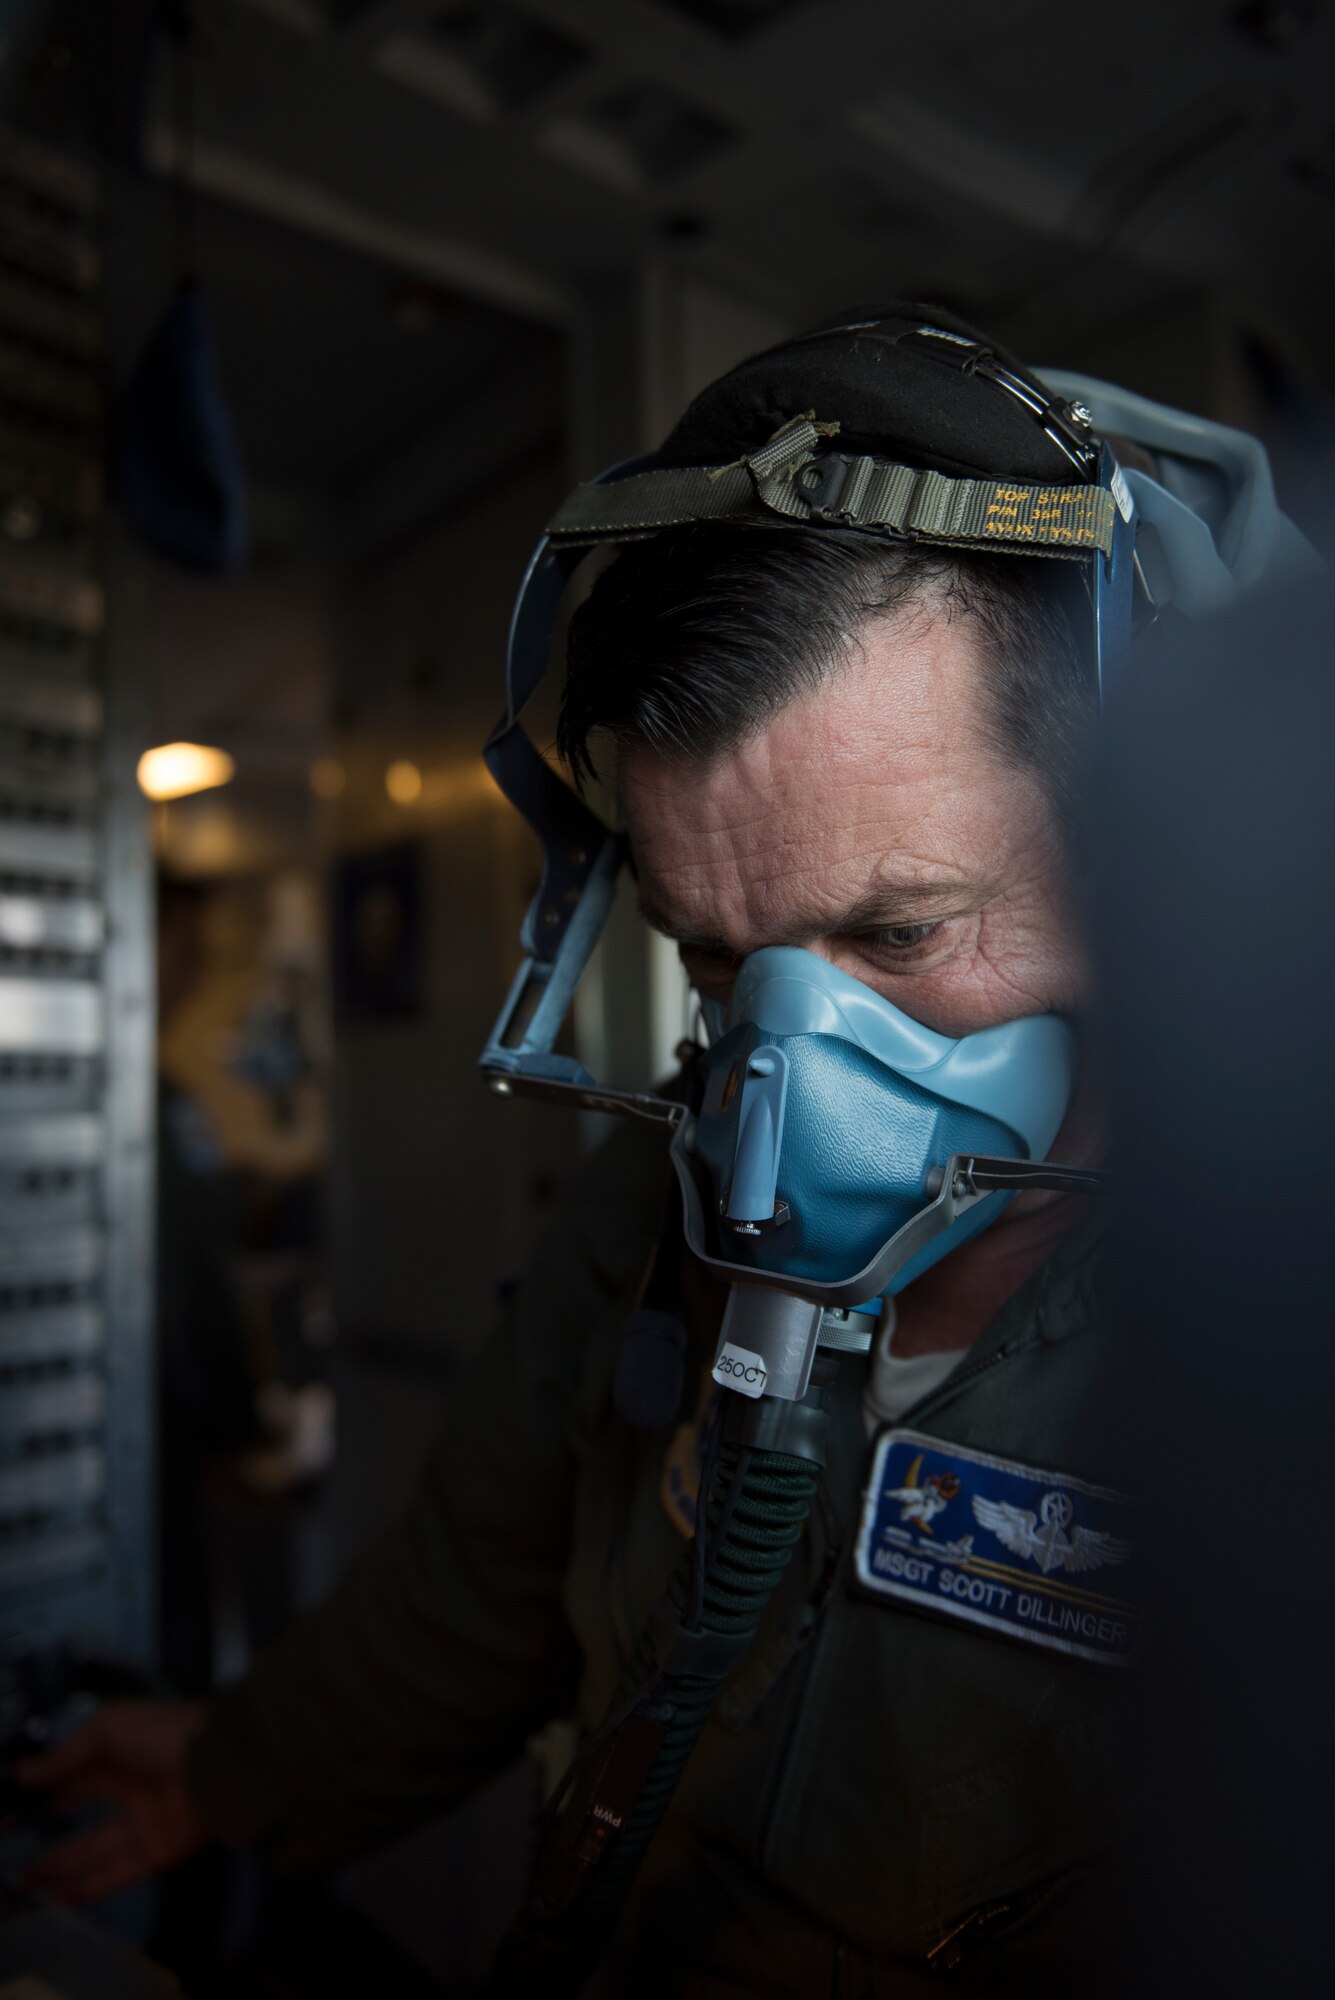 Master Sgt. Scott Dillinger, 6th Air Refueling Squadron noncommissioned officer in charge of standardization and evaluation and a KC-10 Extender flight engineer, conducts a check of an oxygen mask inside the cockpit of a KC-10 at Eielson Air Force, Base, Alaska, June 6, 2018. Dillinger and his crew flew the aircraft to support refueling operations in the Pacific theater. During the five-day mission, Dillinger surpassed 10,000 flight hours. (U.S. Air Force photo by Tech. Sgt. James Hodgman)